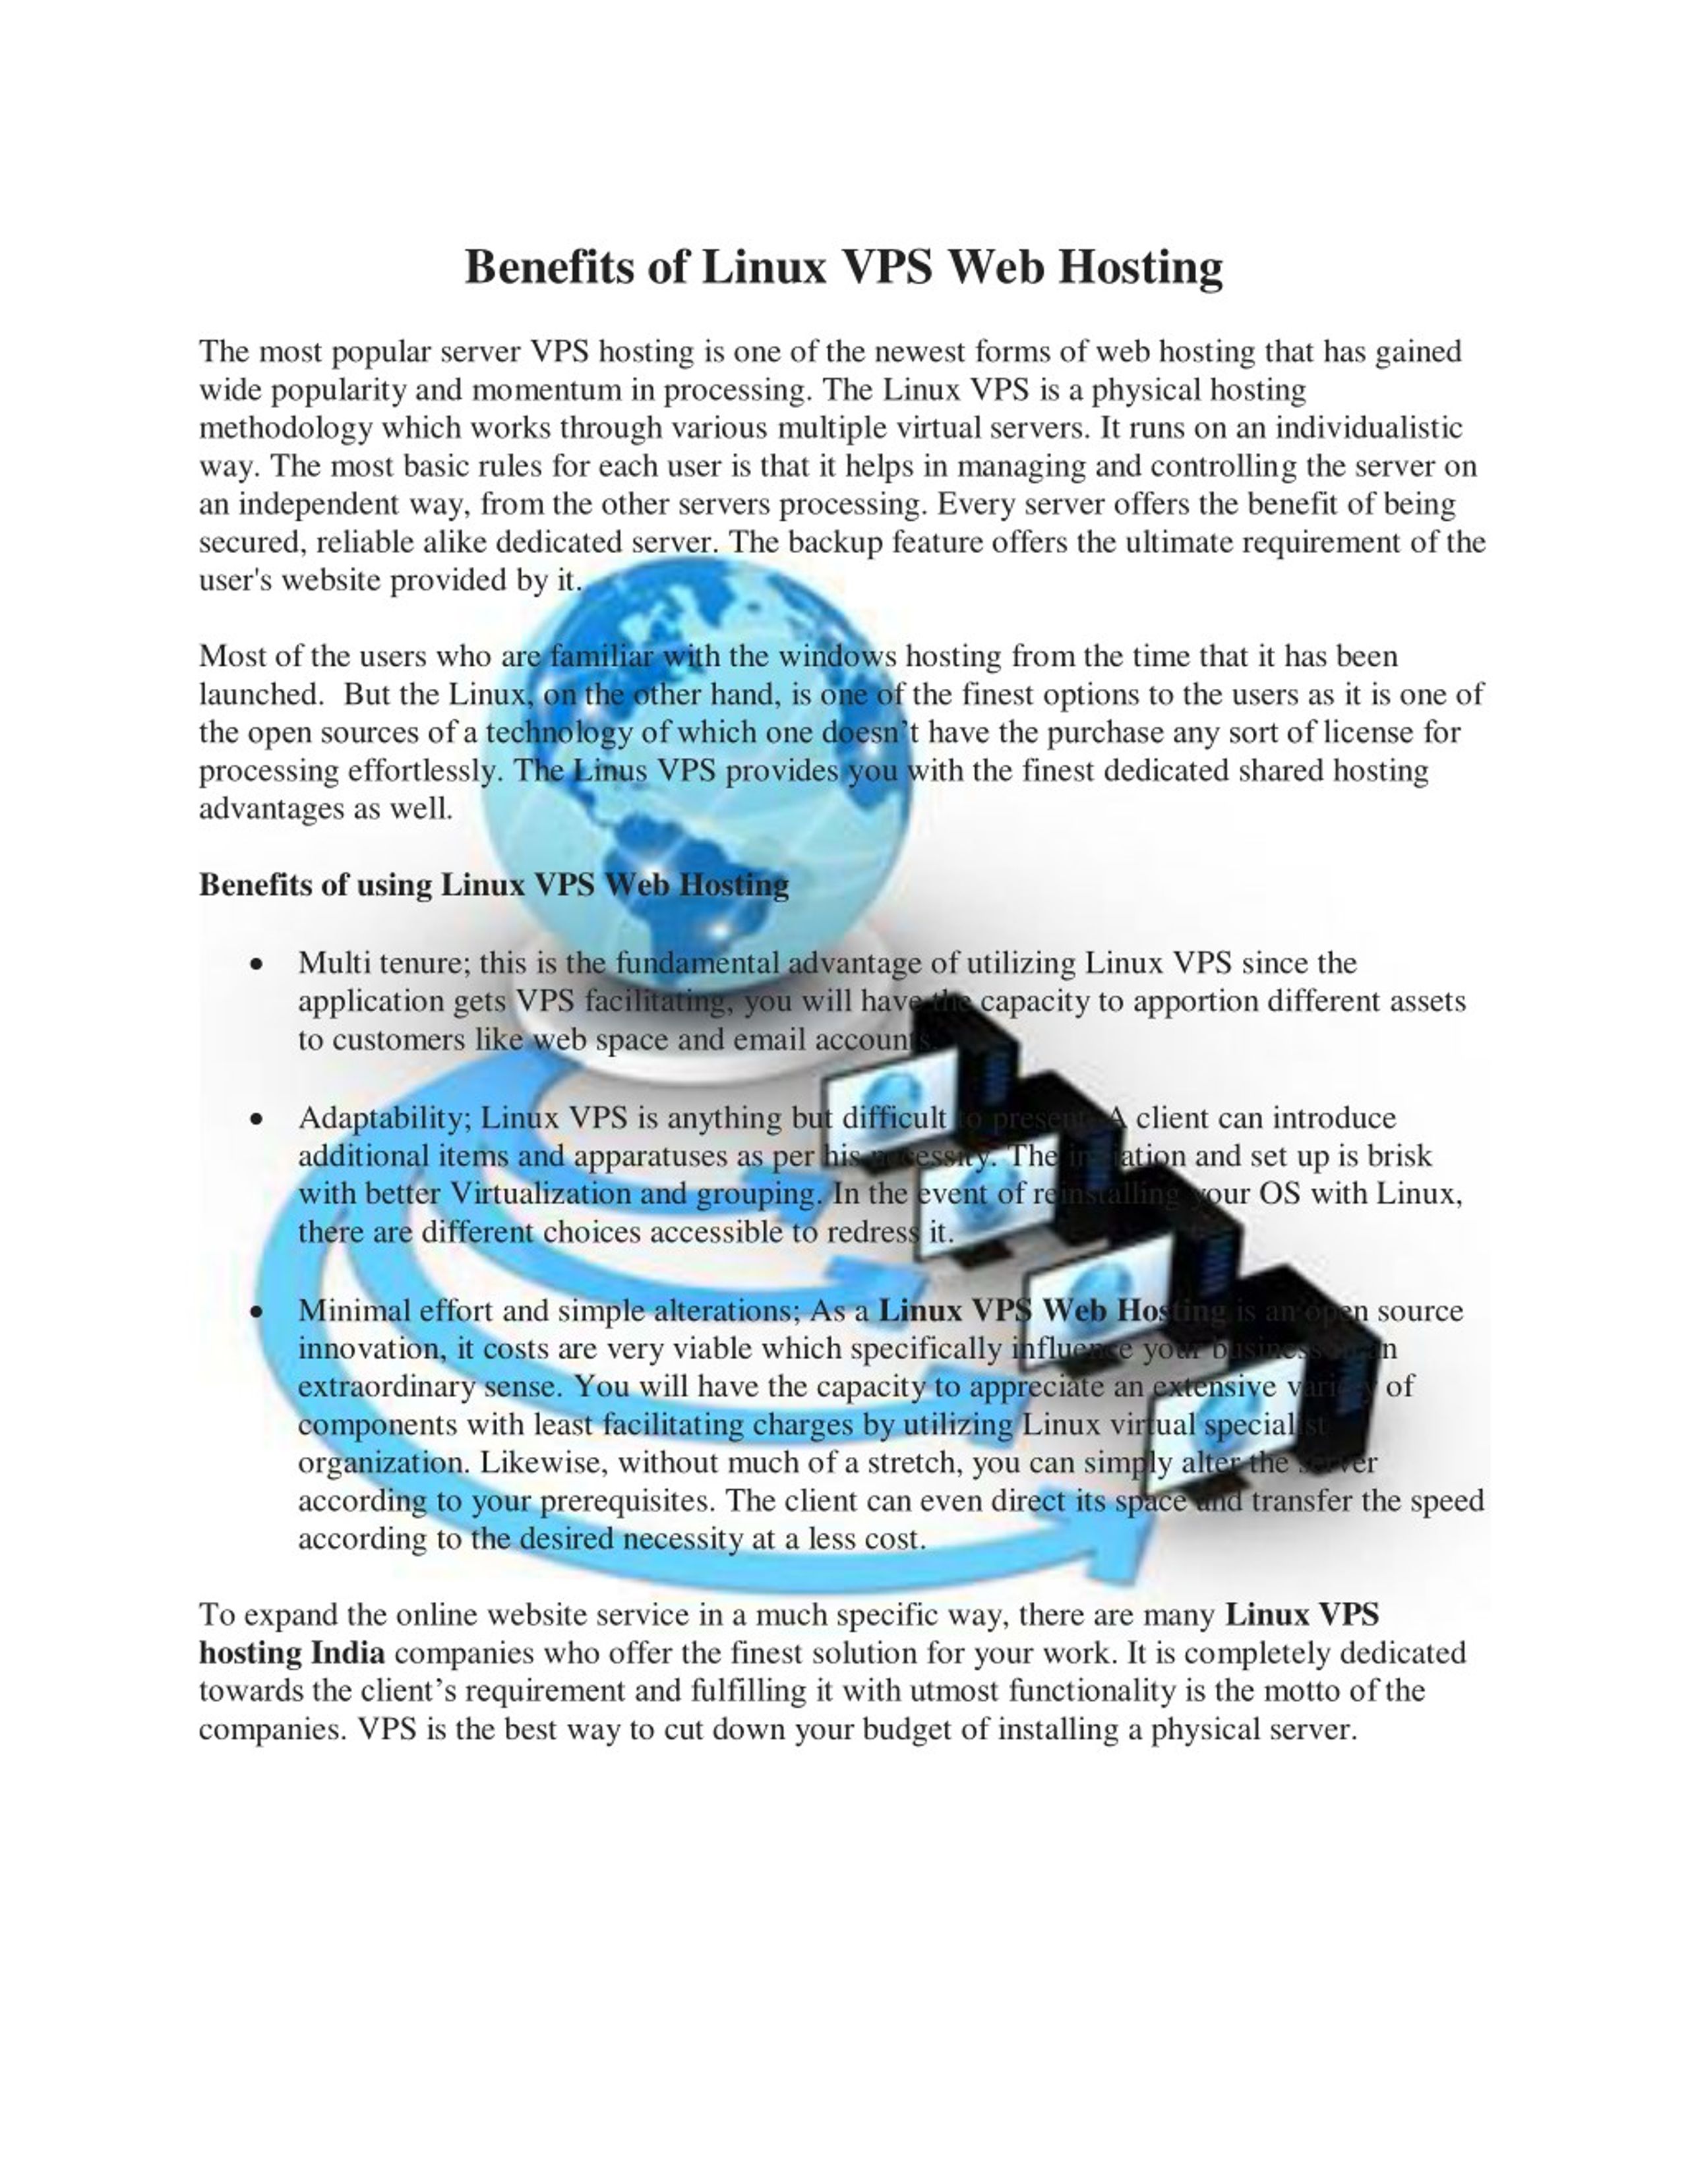 Ppt Benefits Of Linux Vps Web Hosting Powerpoint Presentation Images, Photos, Reviews